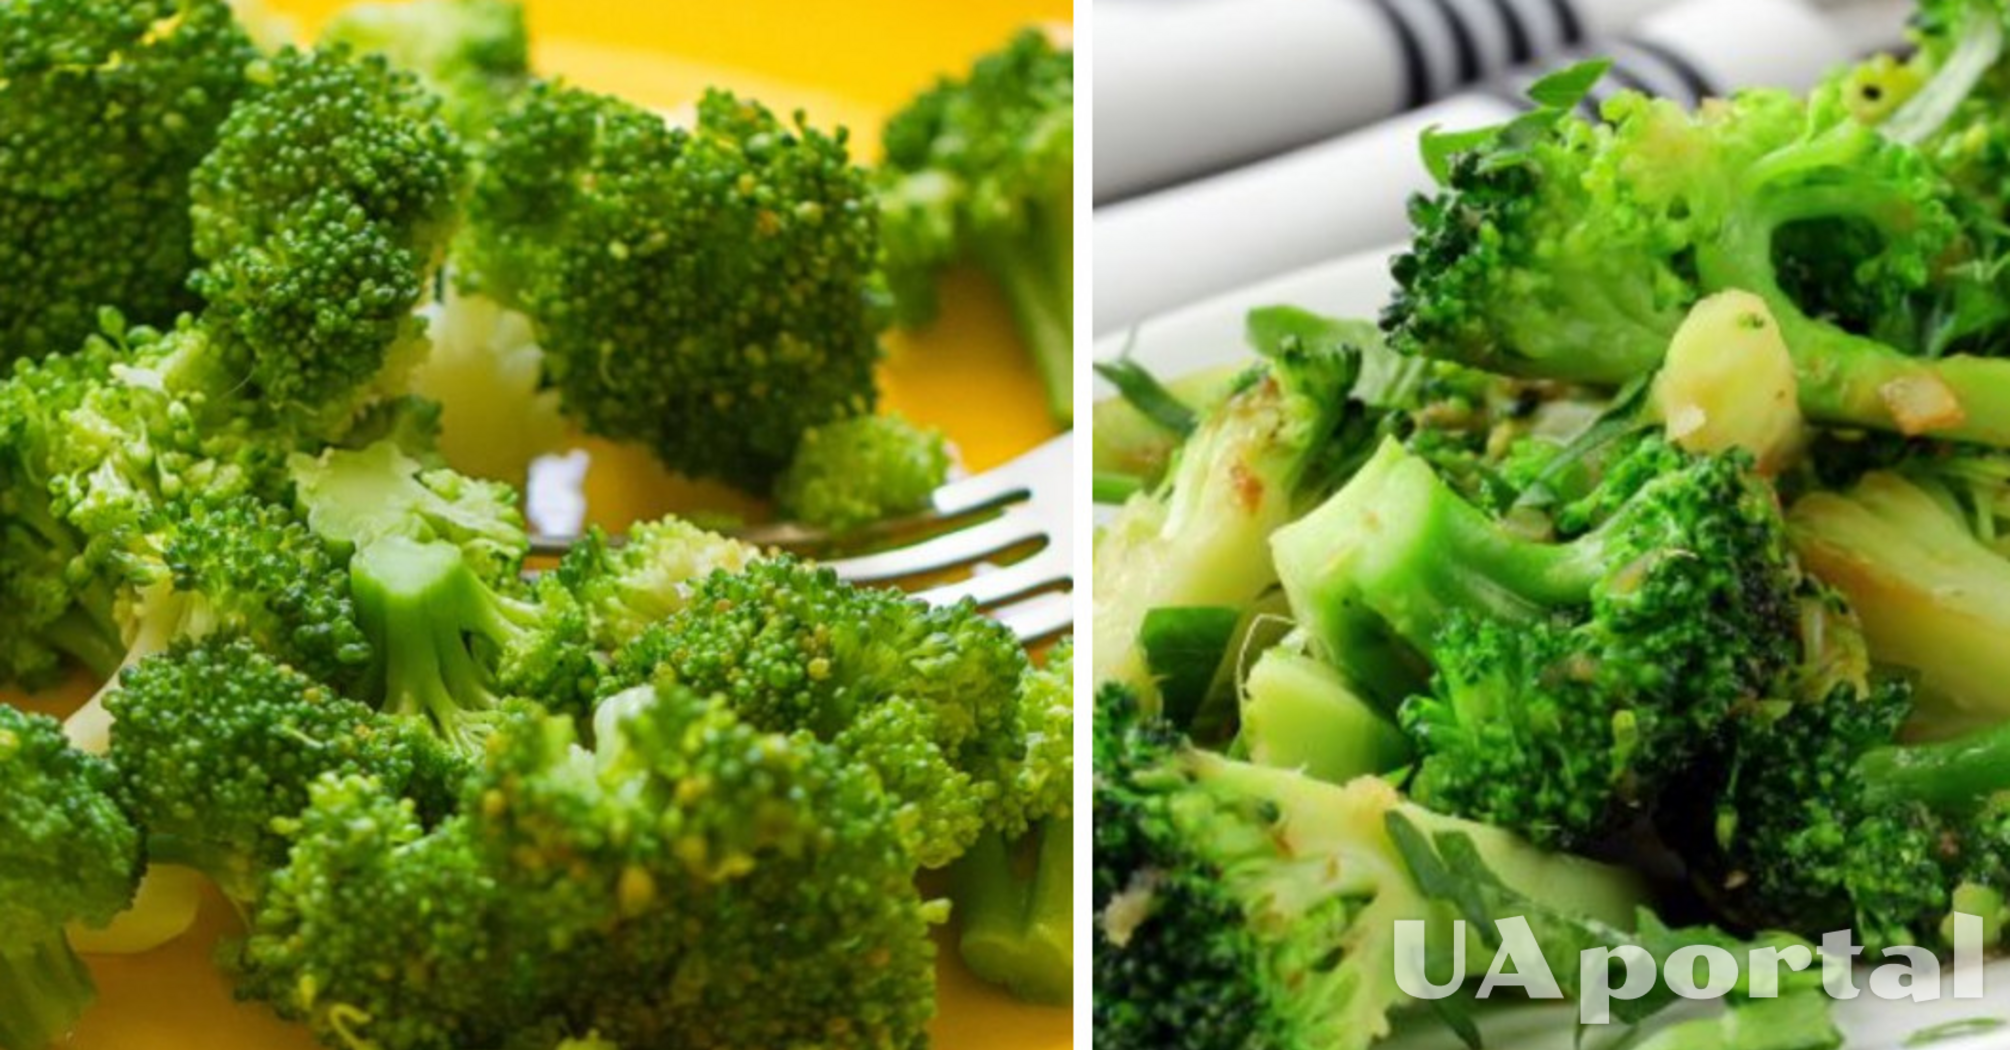 Useful and spicy: recipe for baked broccoli with garlic